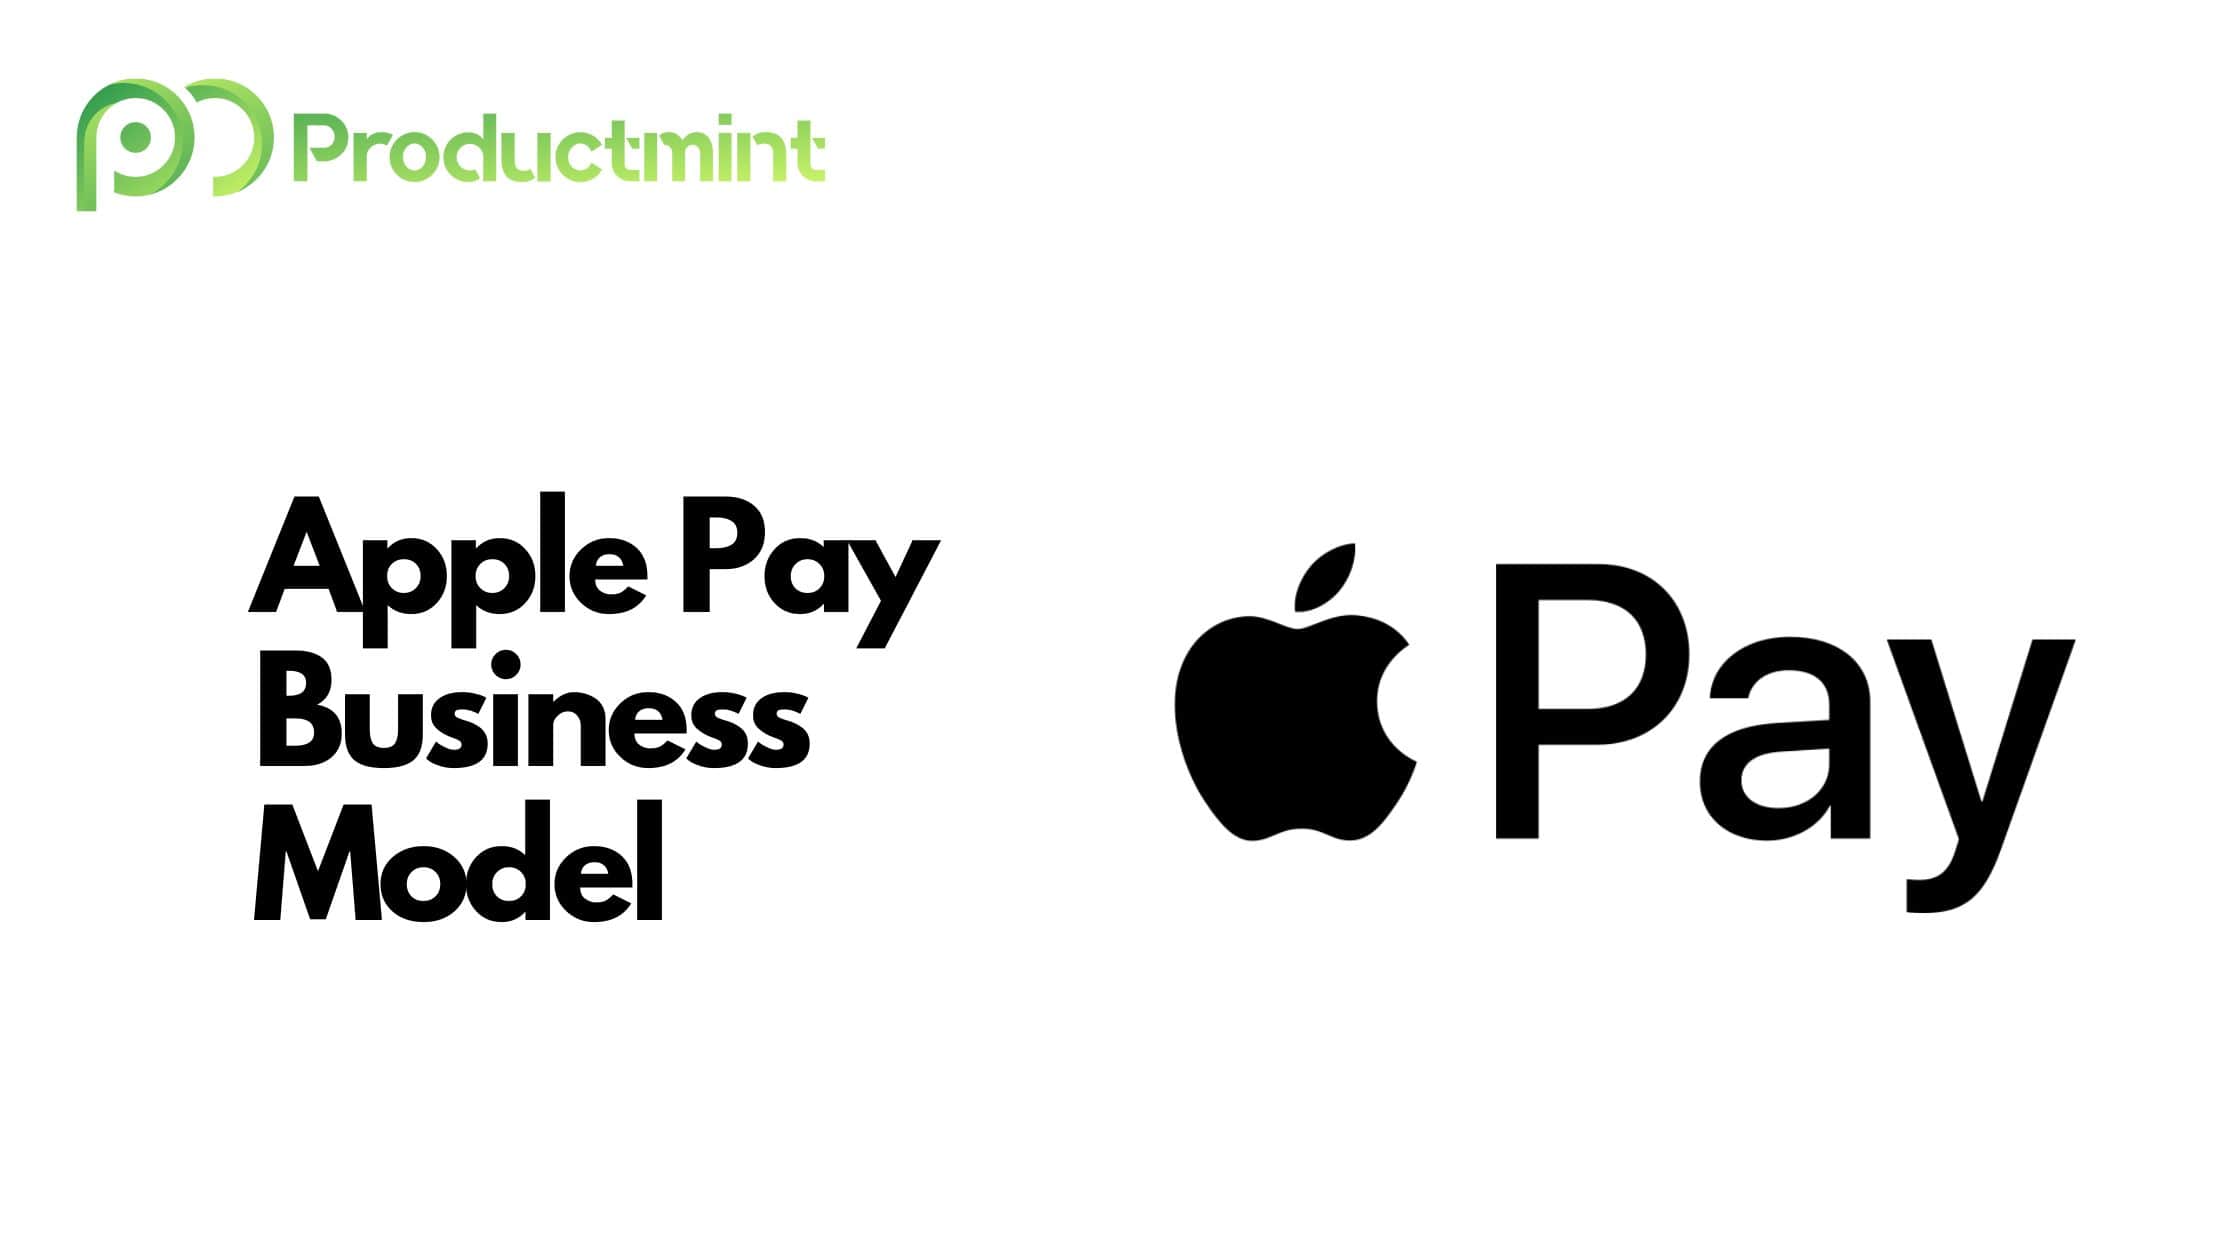 How Apple Pay Makes Money